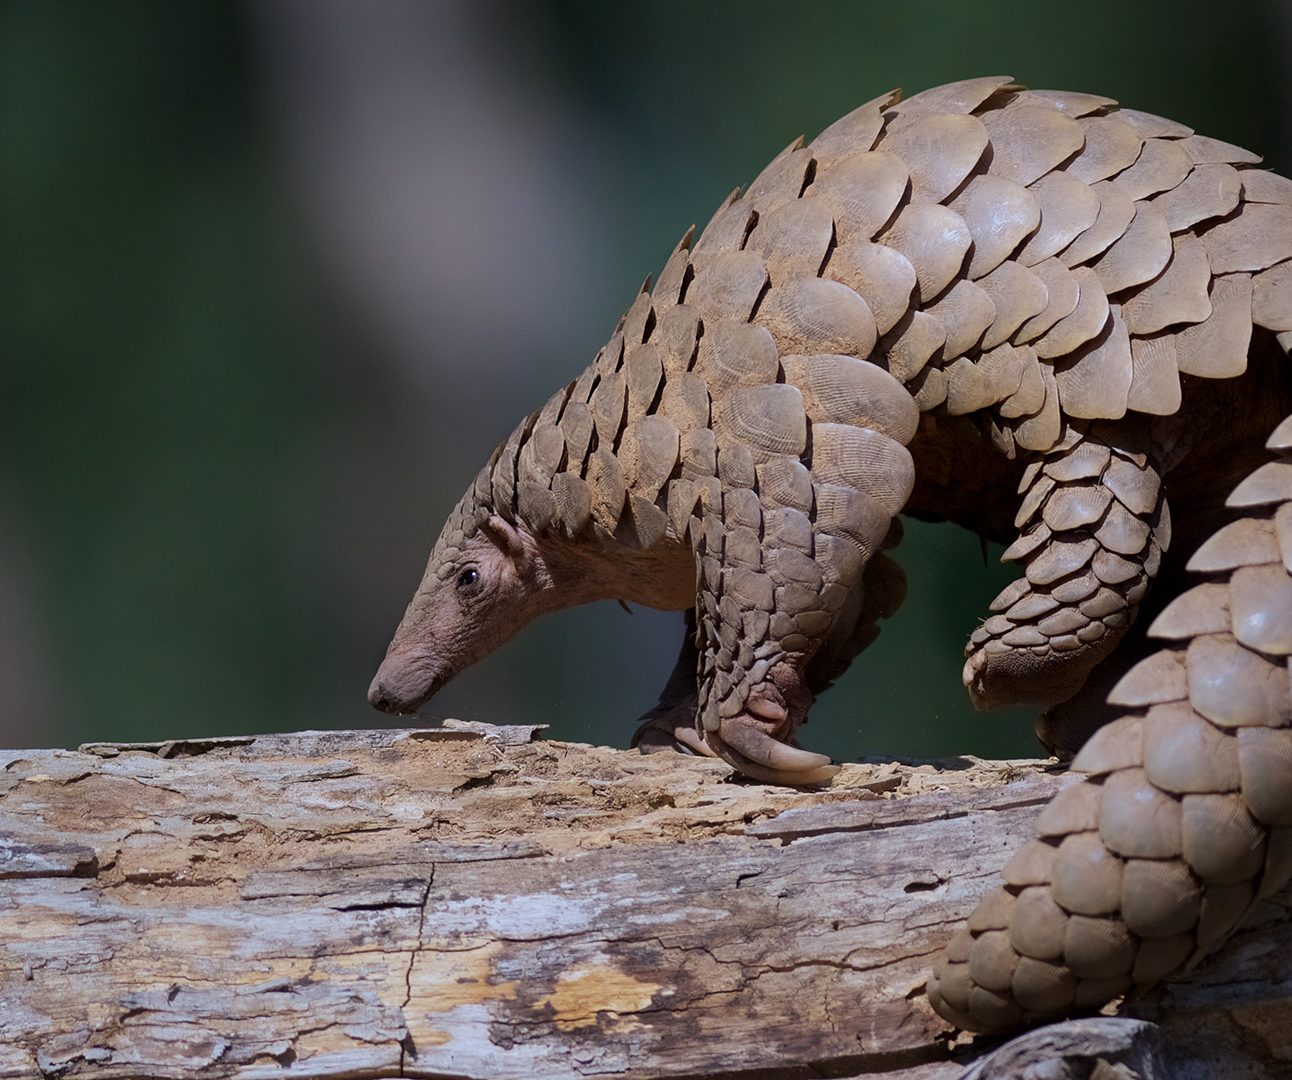 A photo of a pangolin on a tree branch